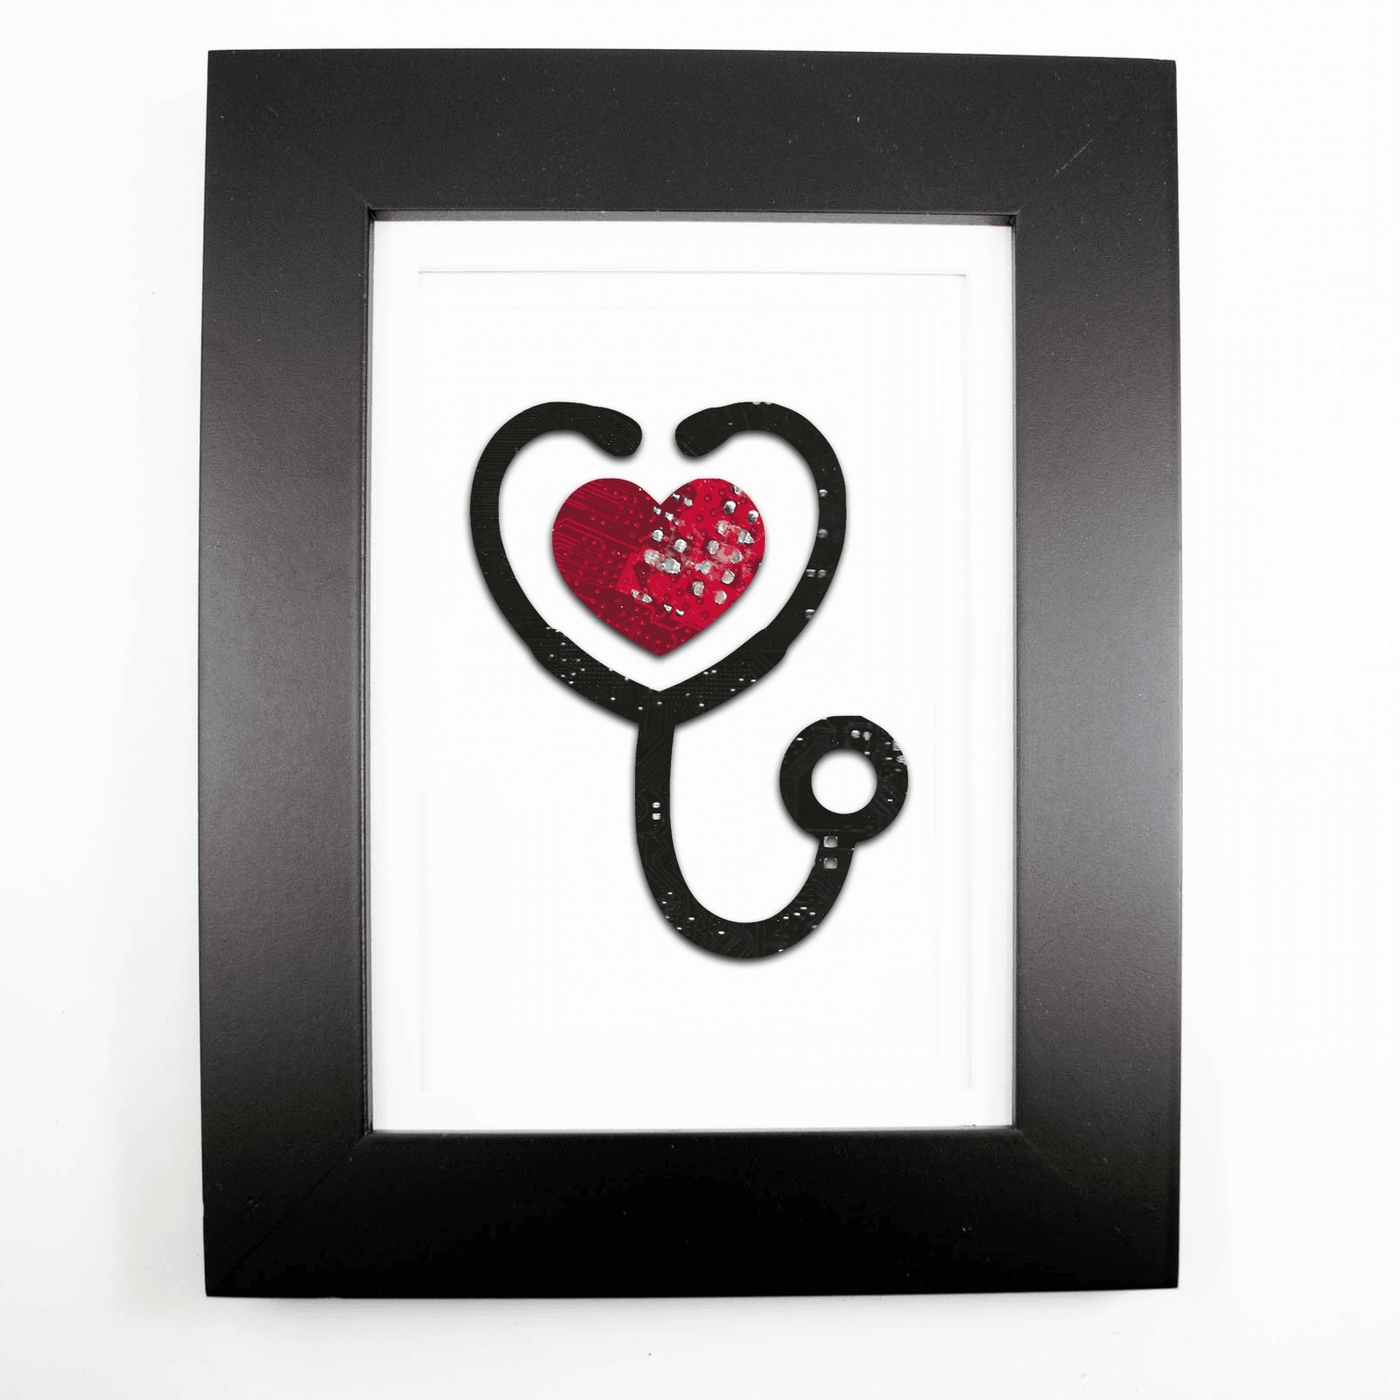 Rounded Stethoscope Circuit Board Art - 5x7